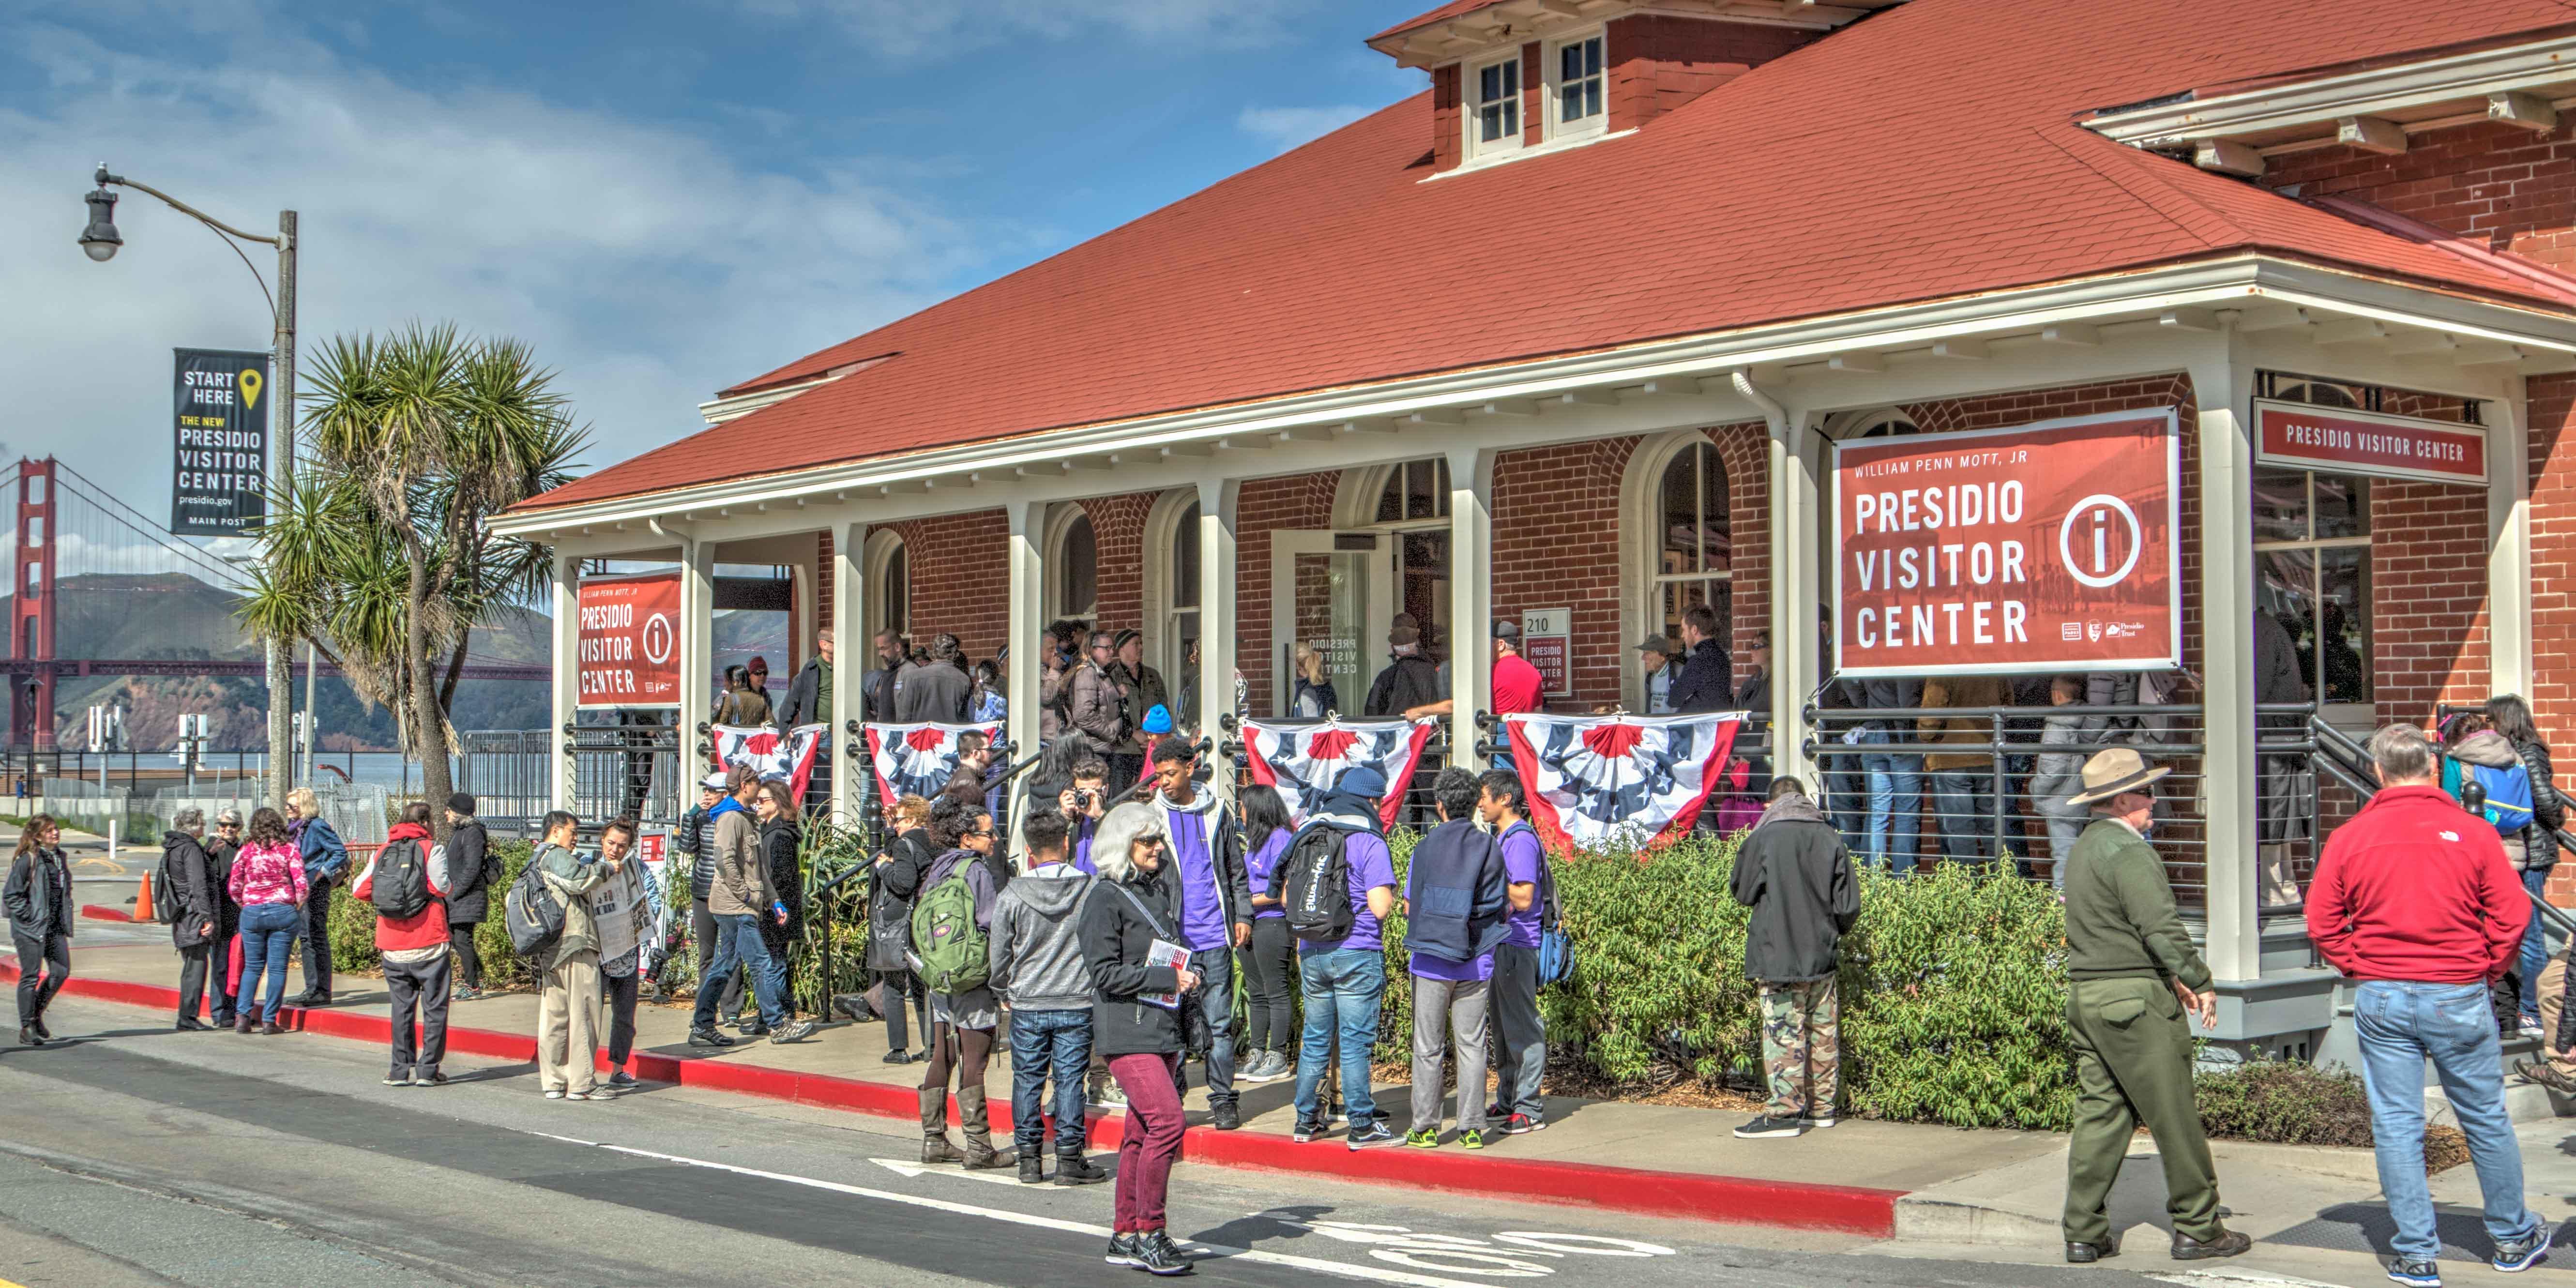 In February 2017, park visitors and members of the community gathered for the opening of the new William Penn Mott, Jr. Presidio Visitor Center. The new center is located on the Main Post, in view of the Golden Gate Bridge